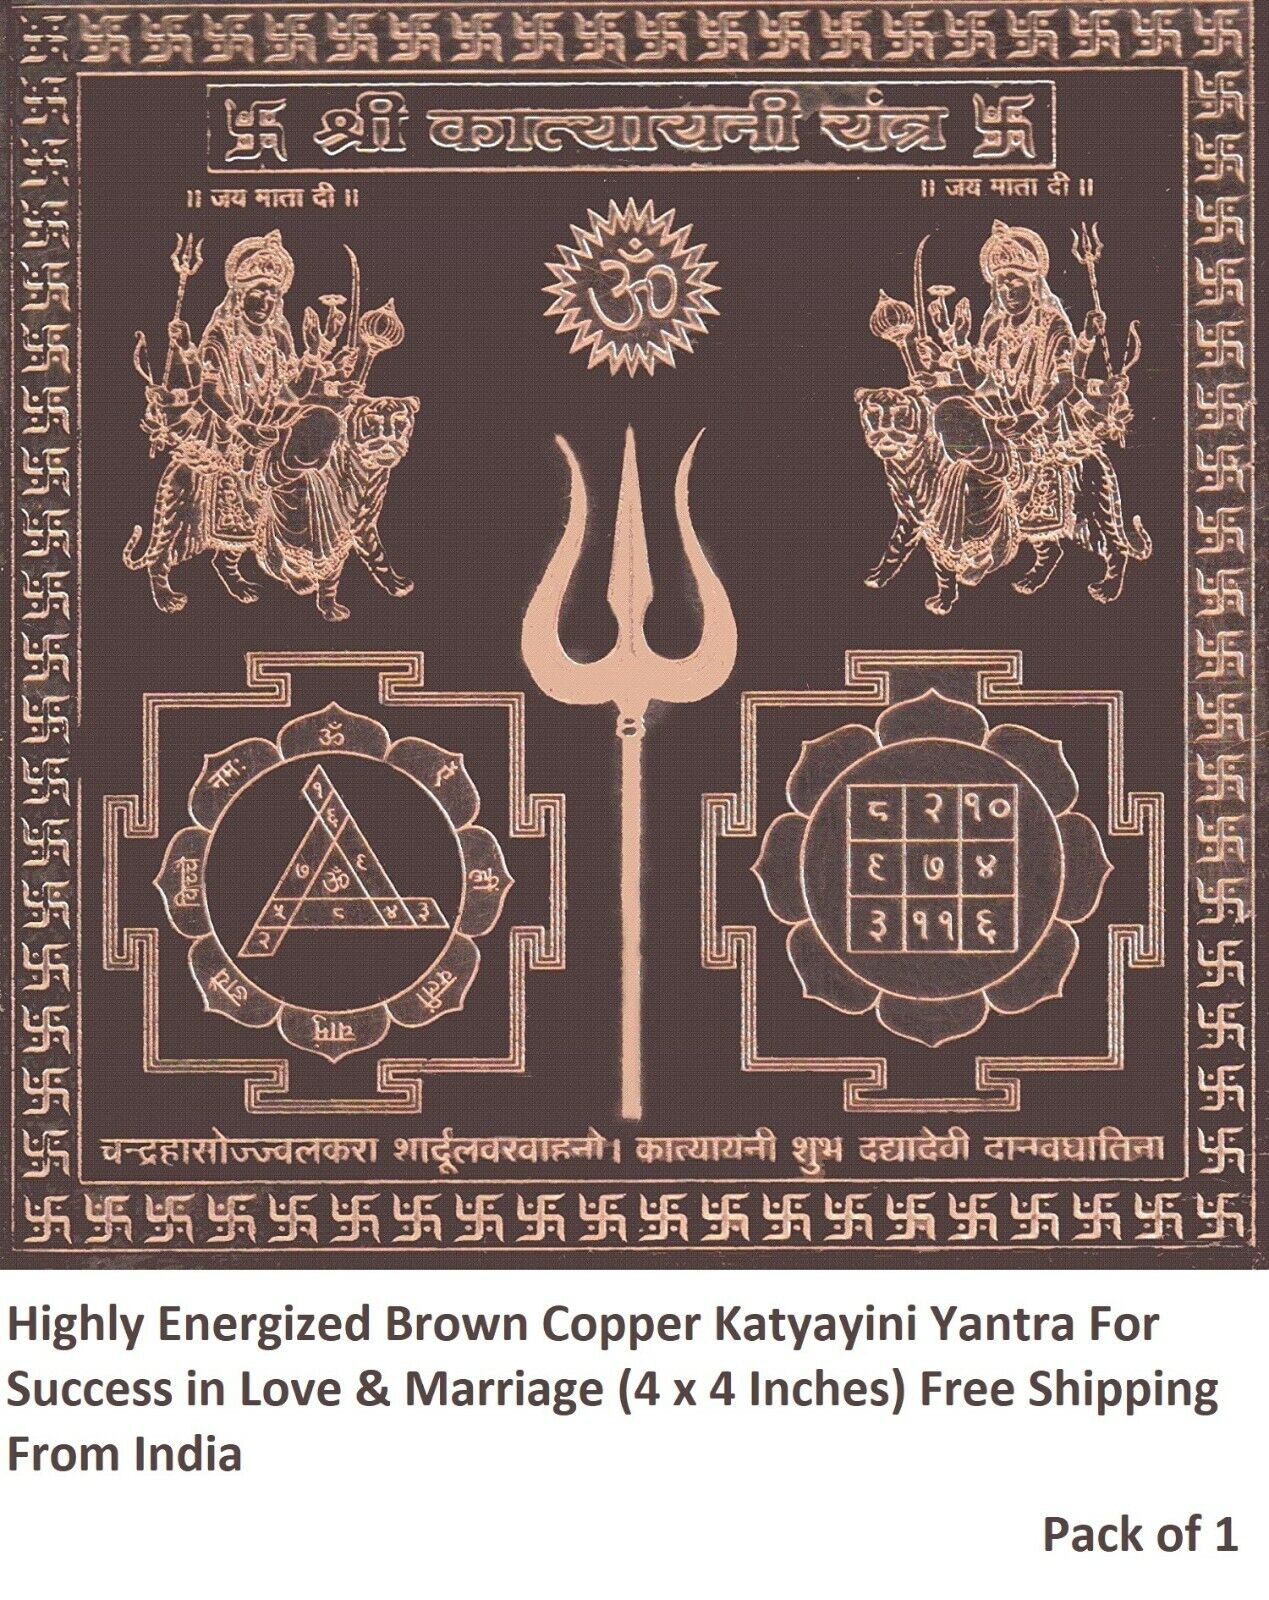 1 x Highly Energized Brown Copper Katyayini Yantra For Successful Marriage